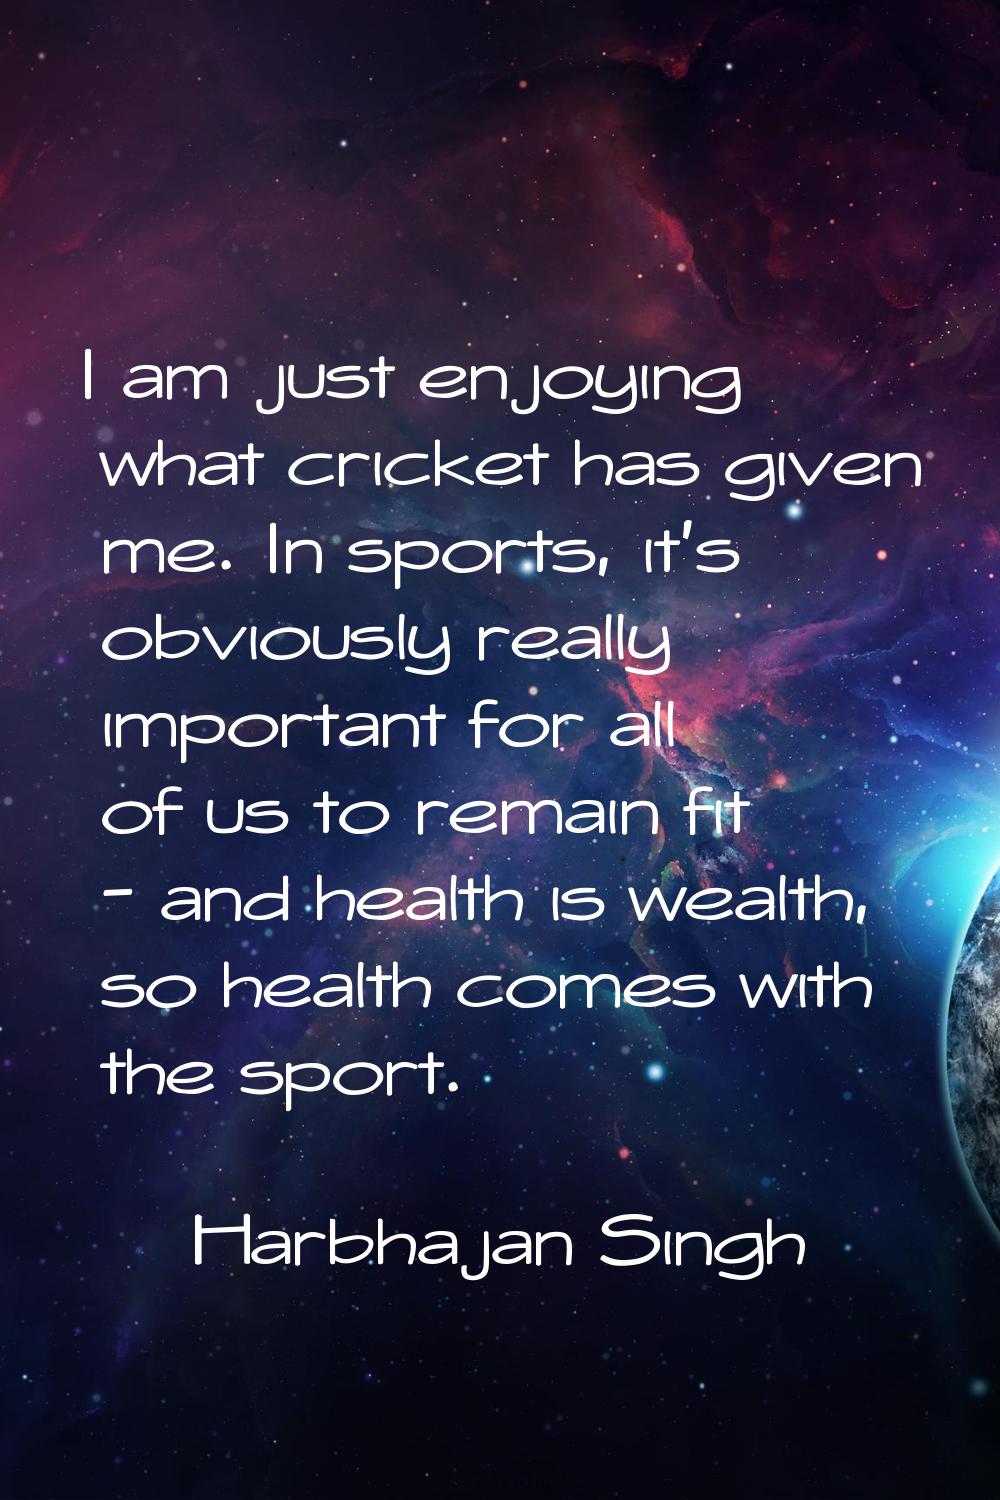 I am just enjoying what cricket has given me. In sports, it's obviously really important for all of